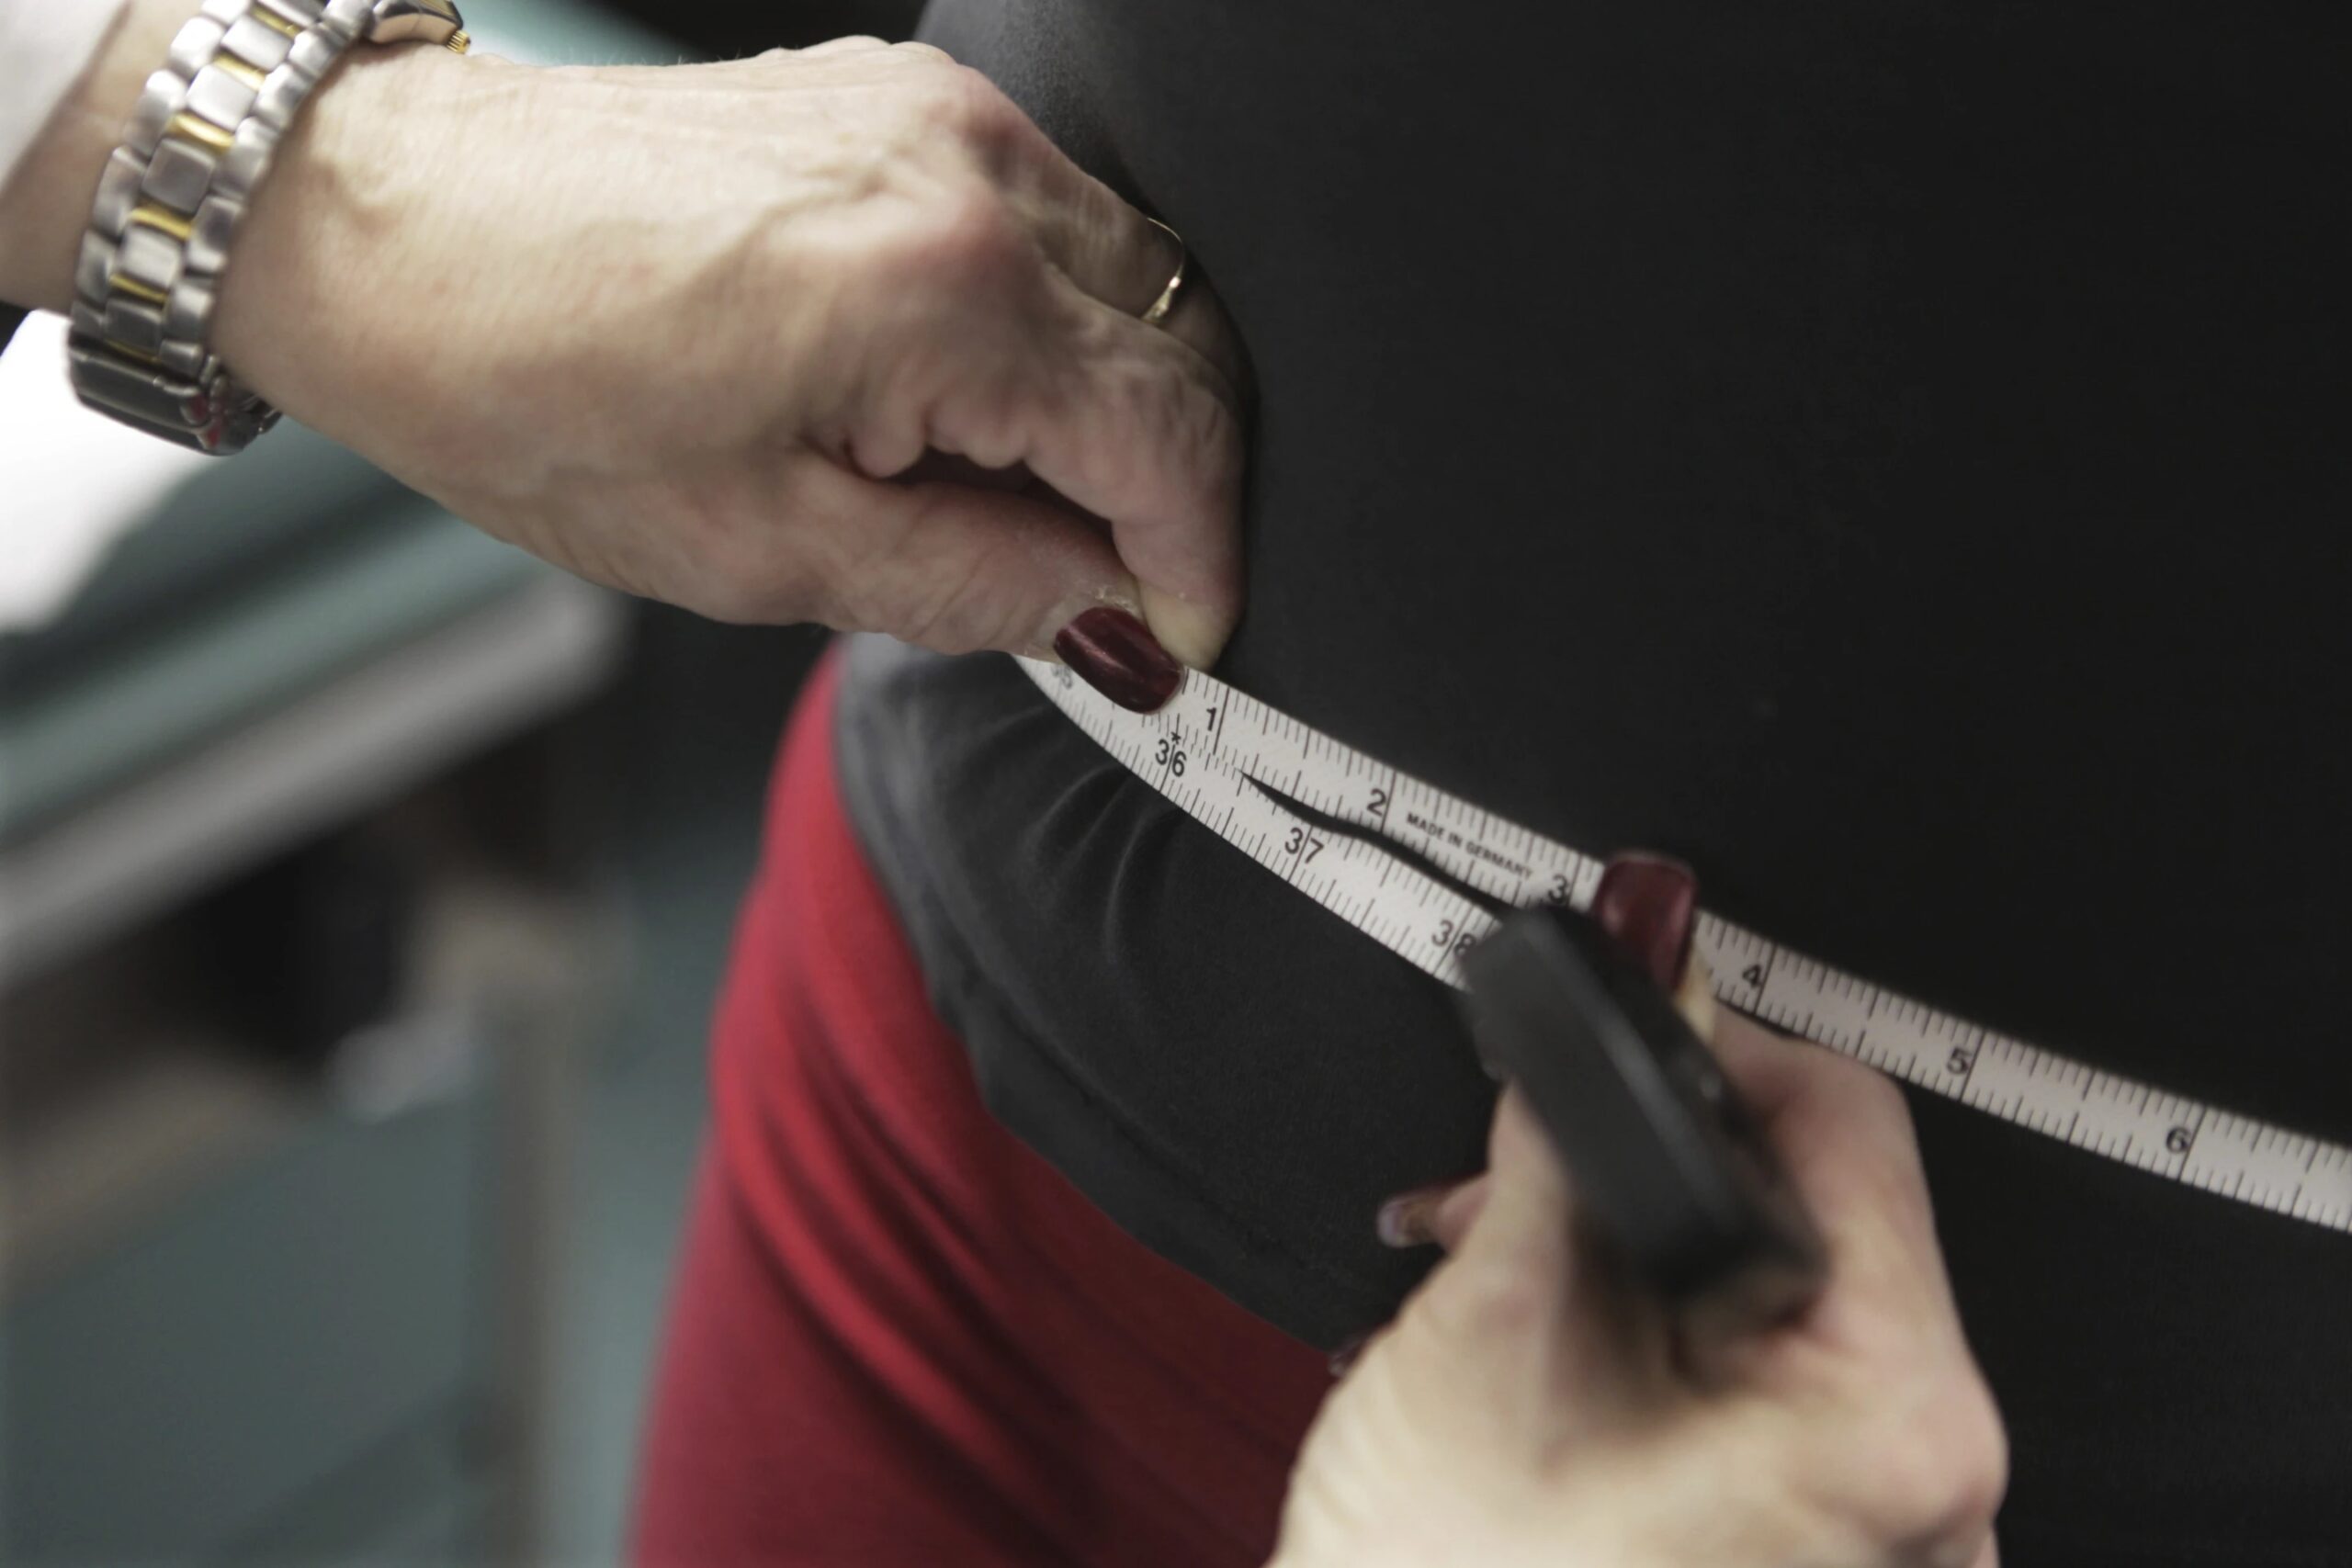 A waist is measured during an obesity prevention study in Chicago, Jan. 20, 2010. (AP Photo/M. Spencer Green, File)